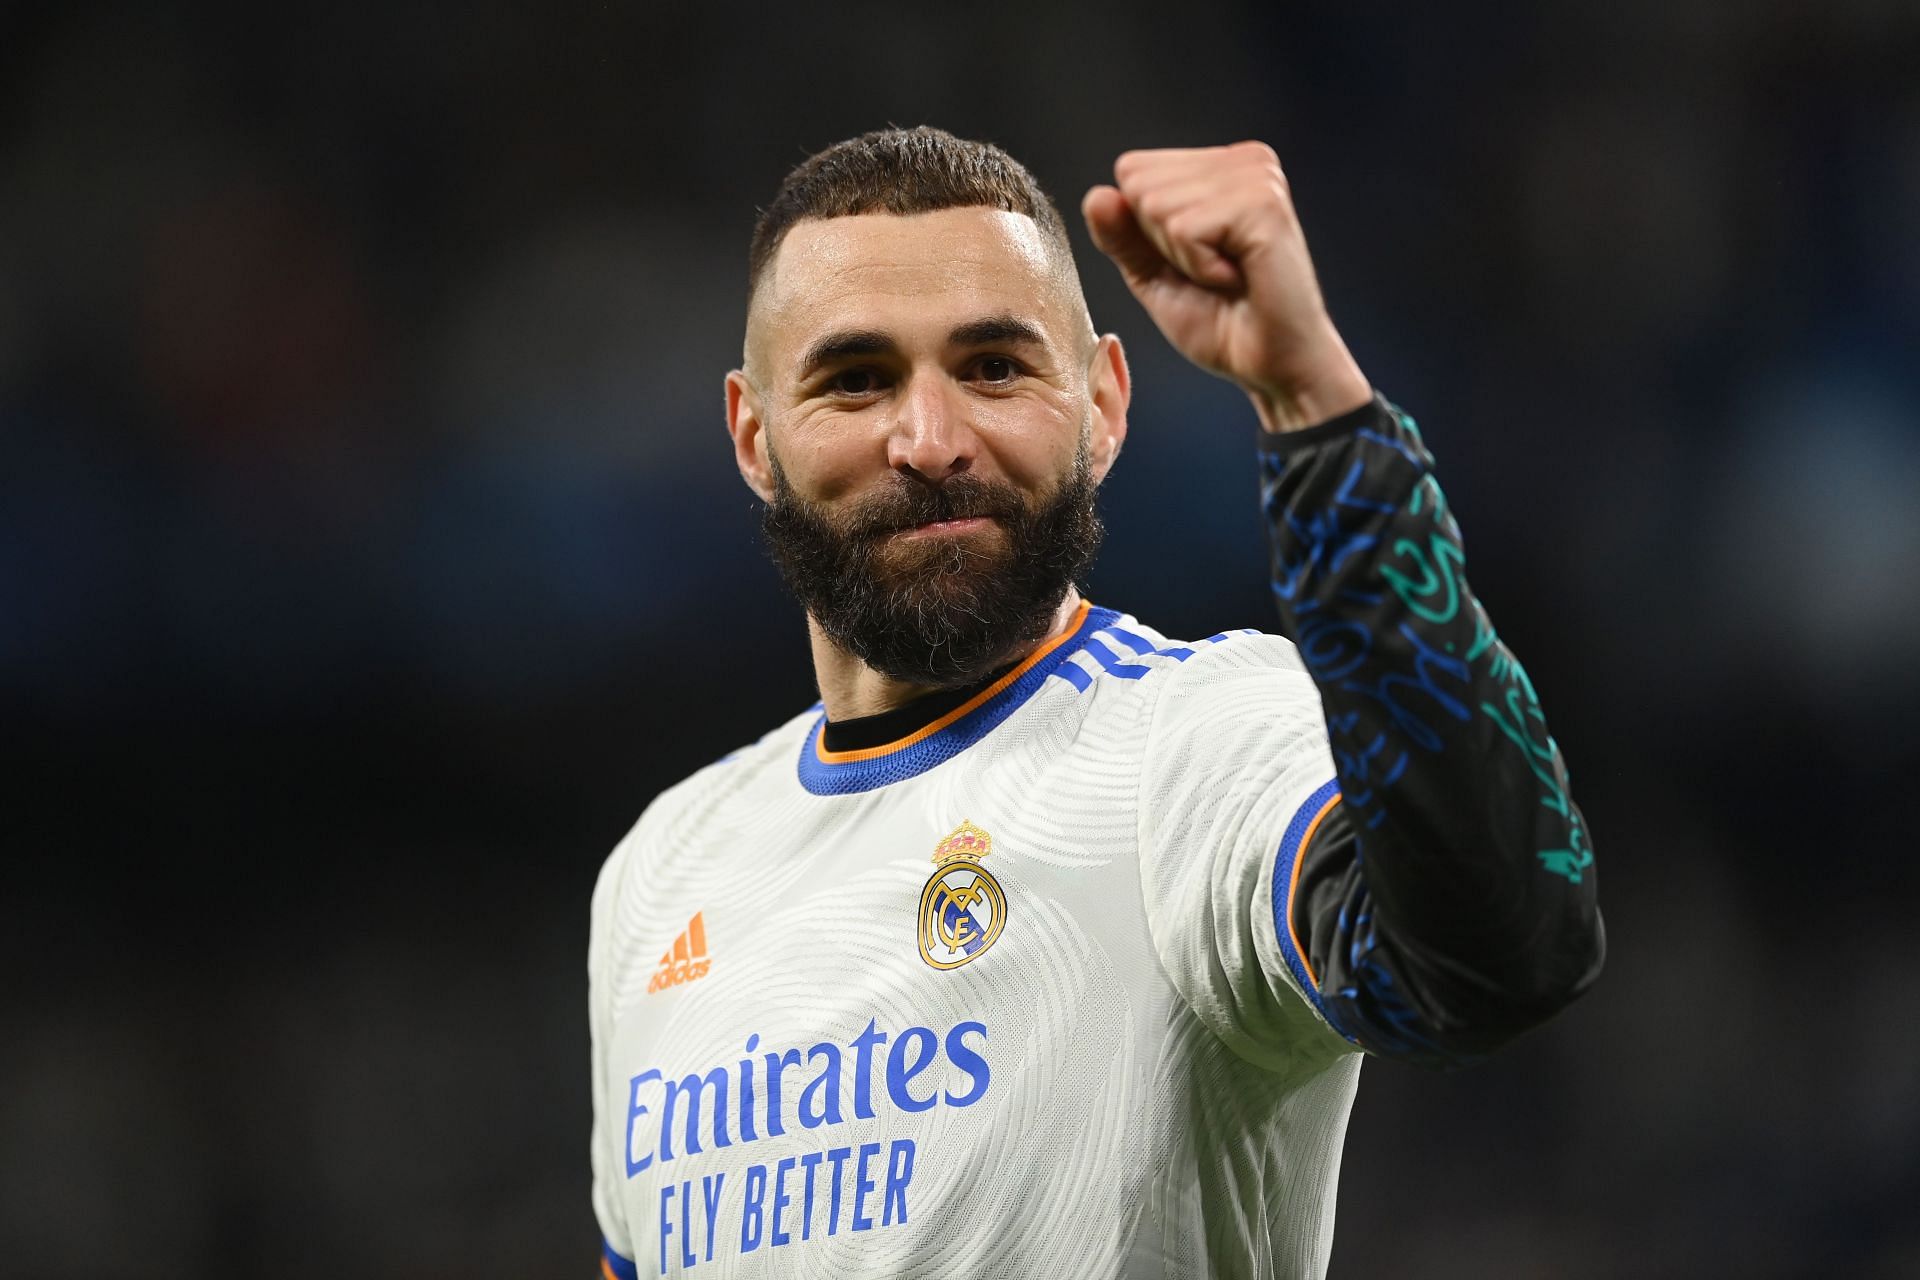 Karim Benzema has captivated in the Champions League